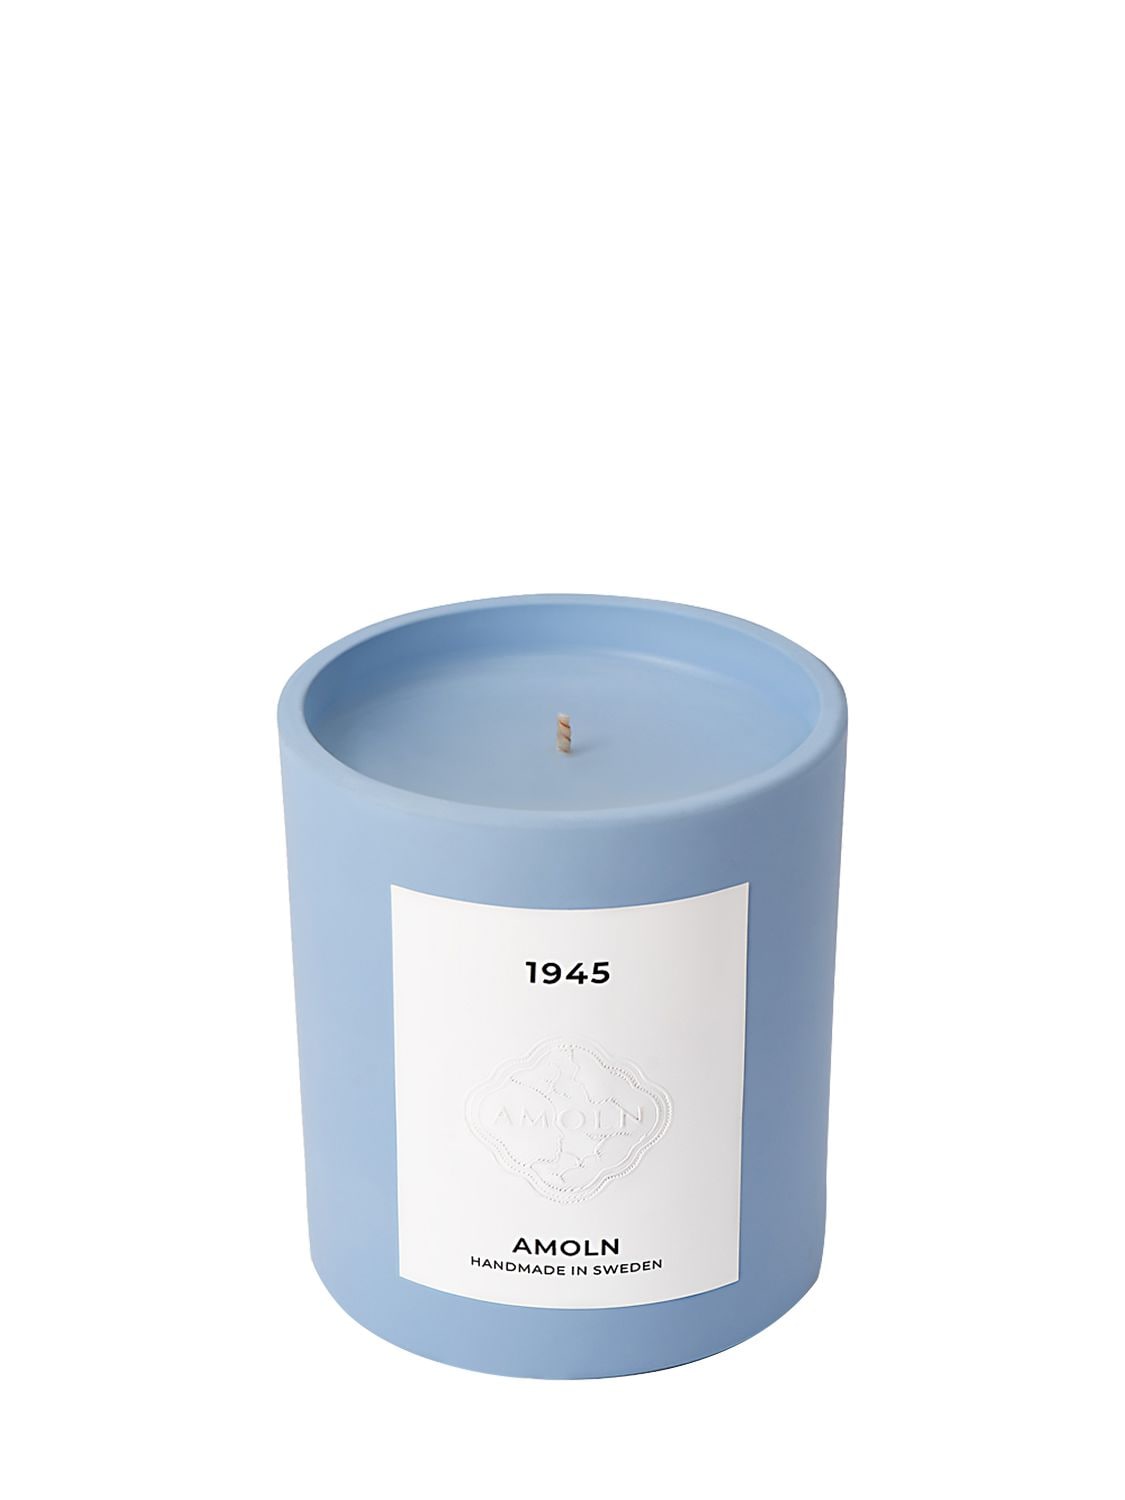 Amoln 1945 Scented Candle In Blue